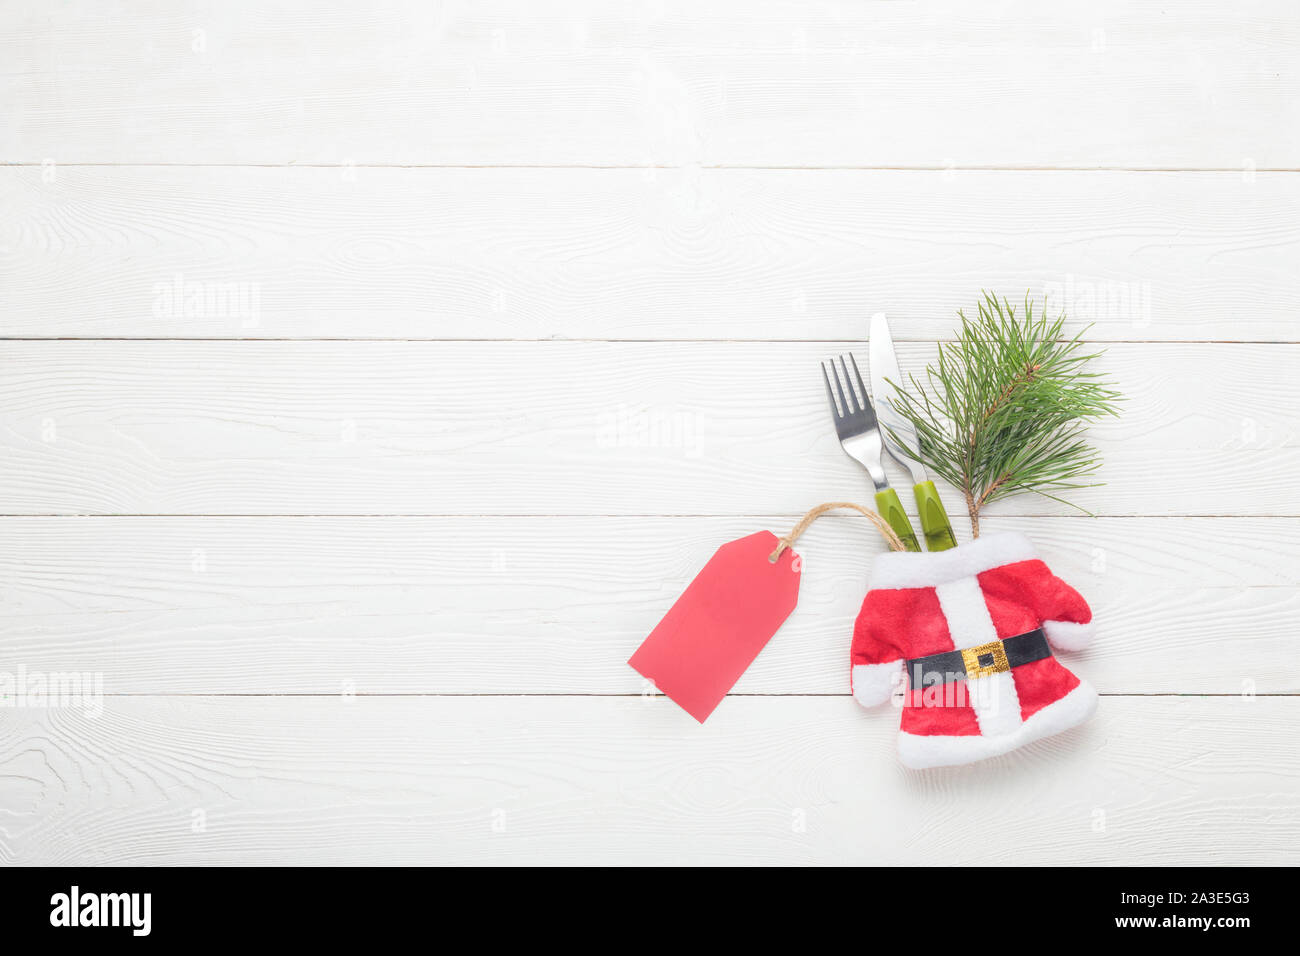 Christmas fork, knife with price tag on white wooden background Stock Photo